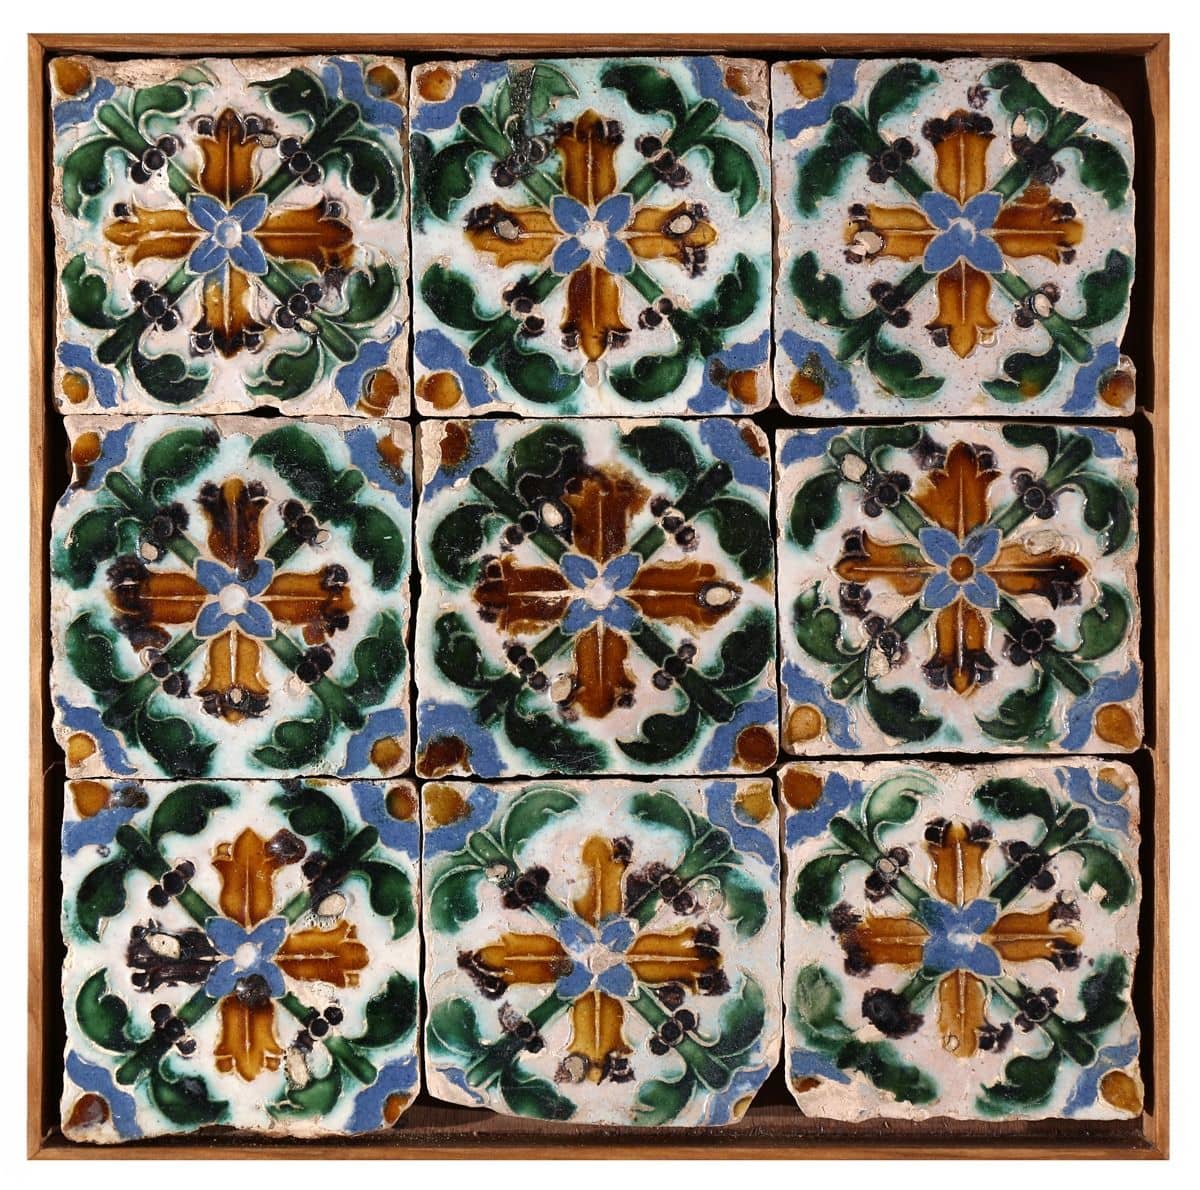 Spanish-Arabic tile panel from the 16th century that you can buy at D'Orey in Lisbon